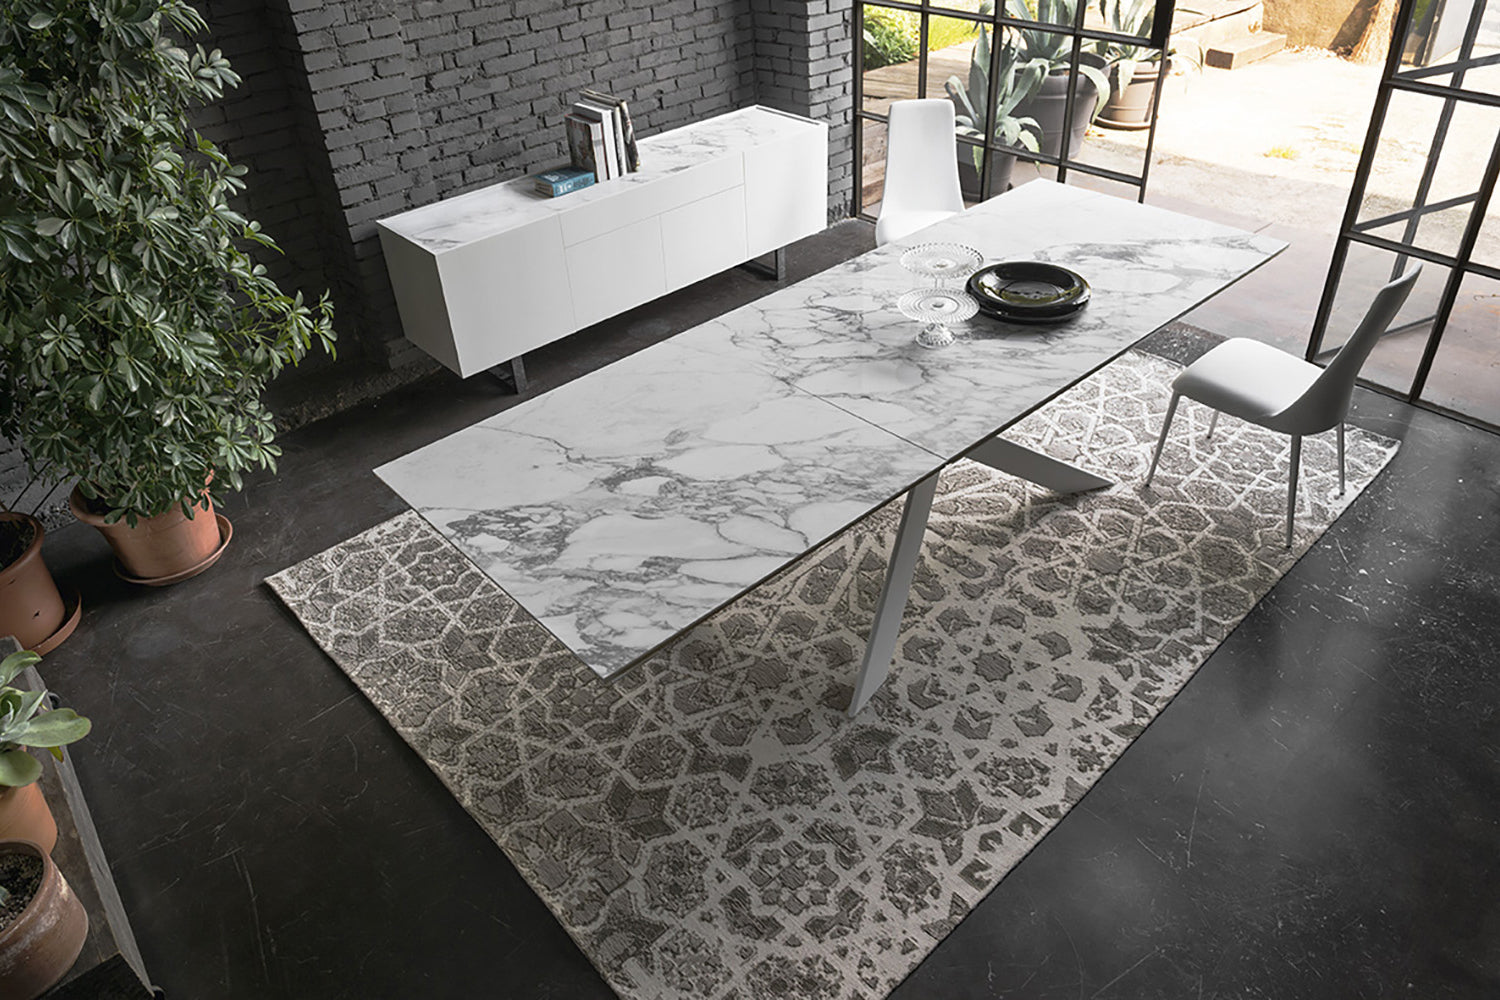 Eclisse Table